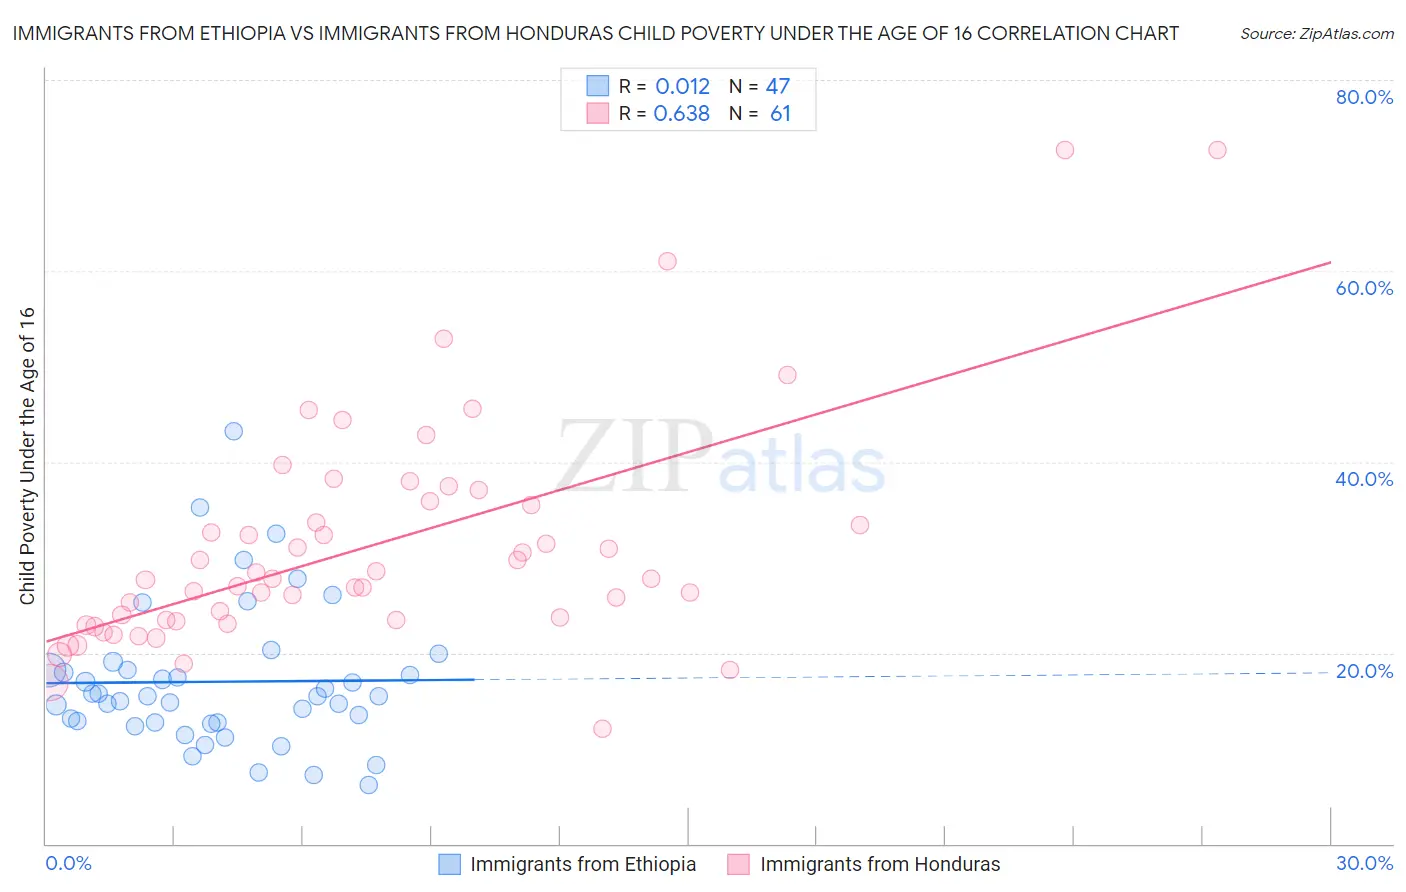 Immigrants from Ethiopia vs Immigrants from Honduras Child Poverty Under the Age of 16